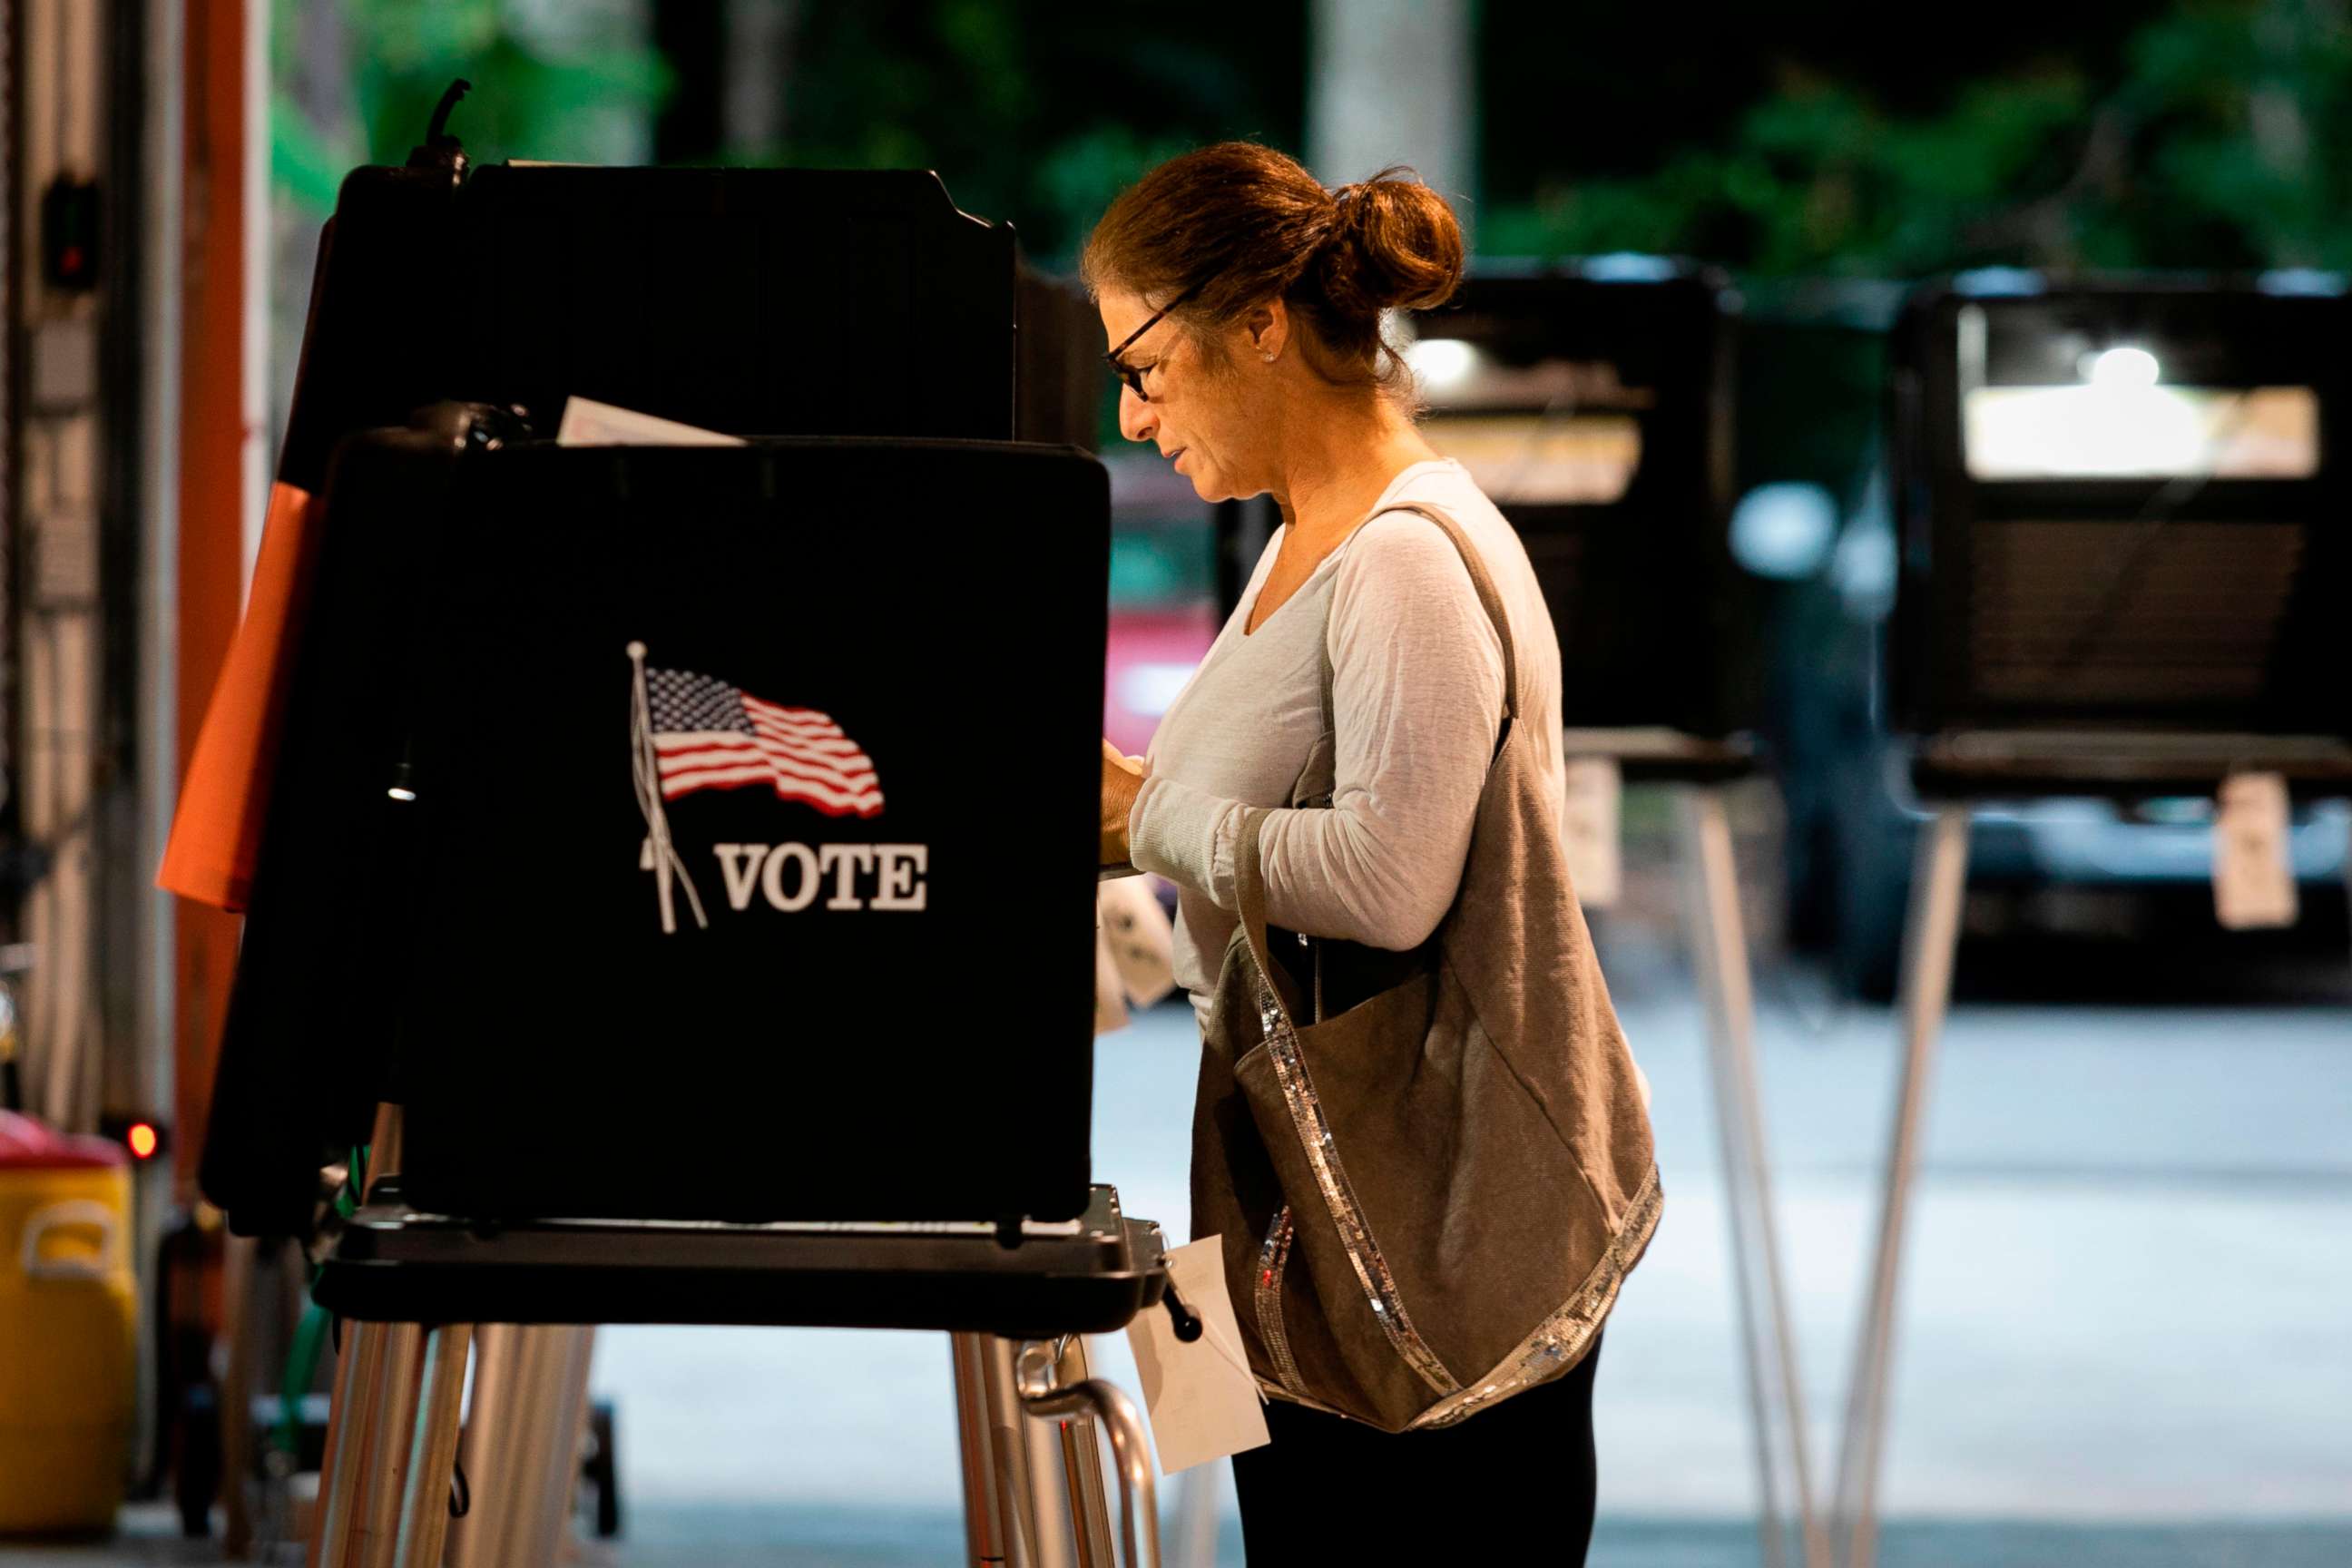 PHOTO: A woman casts her vote during the Florida primary election at Doris &  Phil Sanford Fire Rescue Station Coral Gables in Miami, on March 17, 2020.